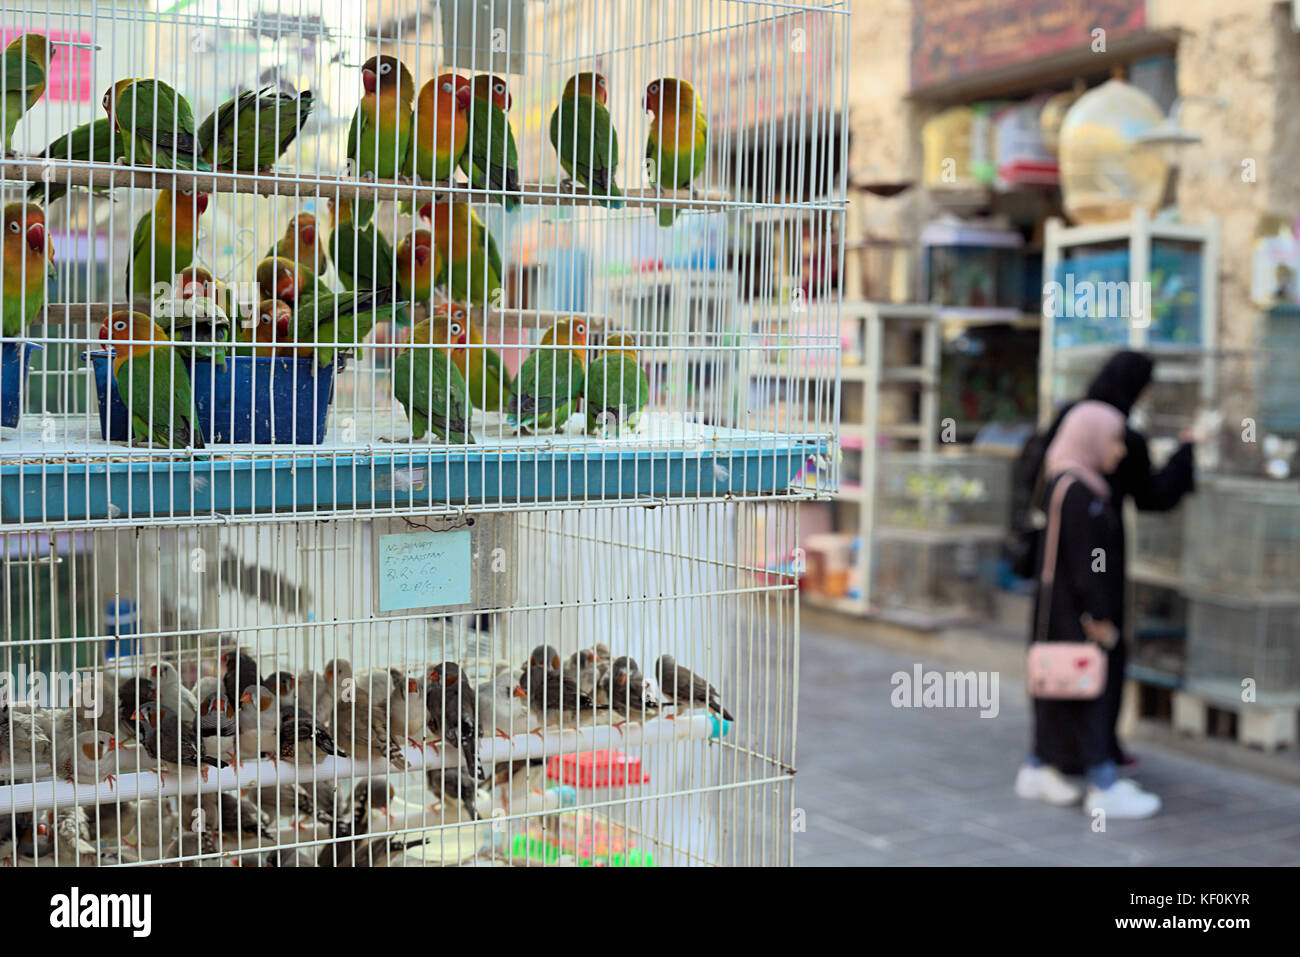 SOUQ WAQIF, DOHA, QATAR - OCTOBER 23, 2017: The pet shop area of Souq Waqif in Qatar, Arabia. Selective focus, the shoppers are not identifiable. Stock Photo